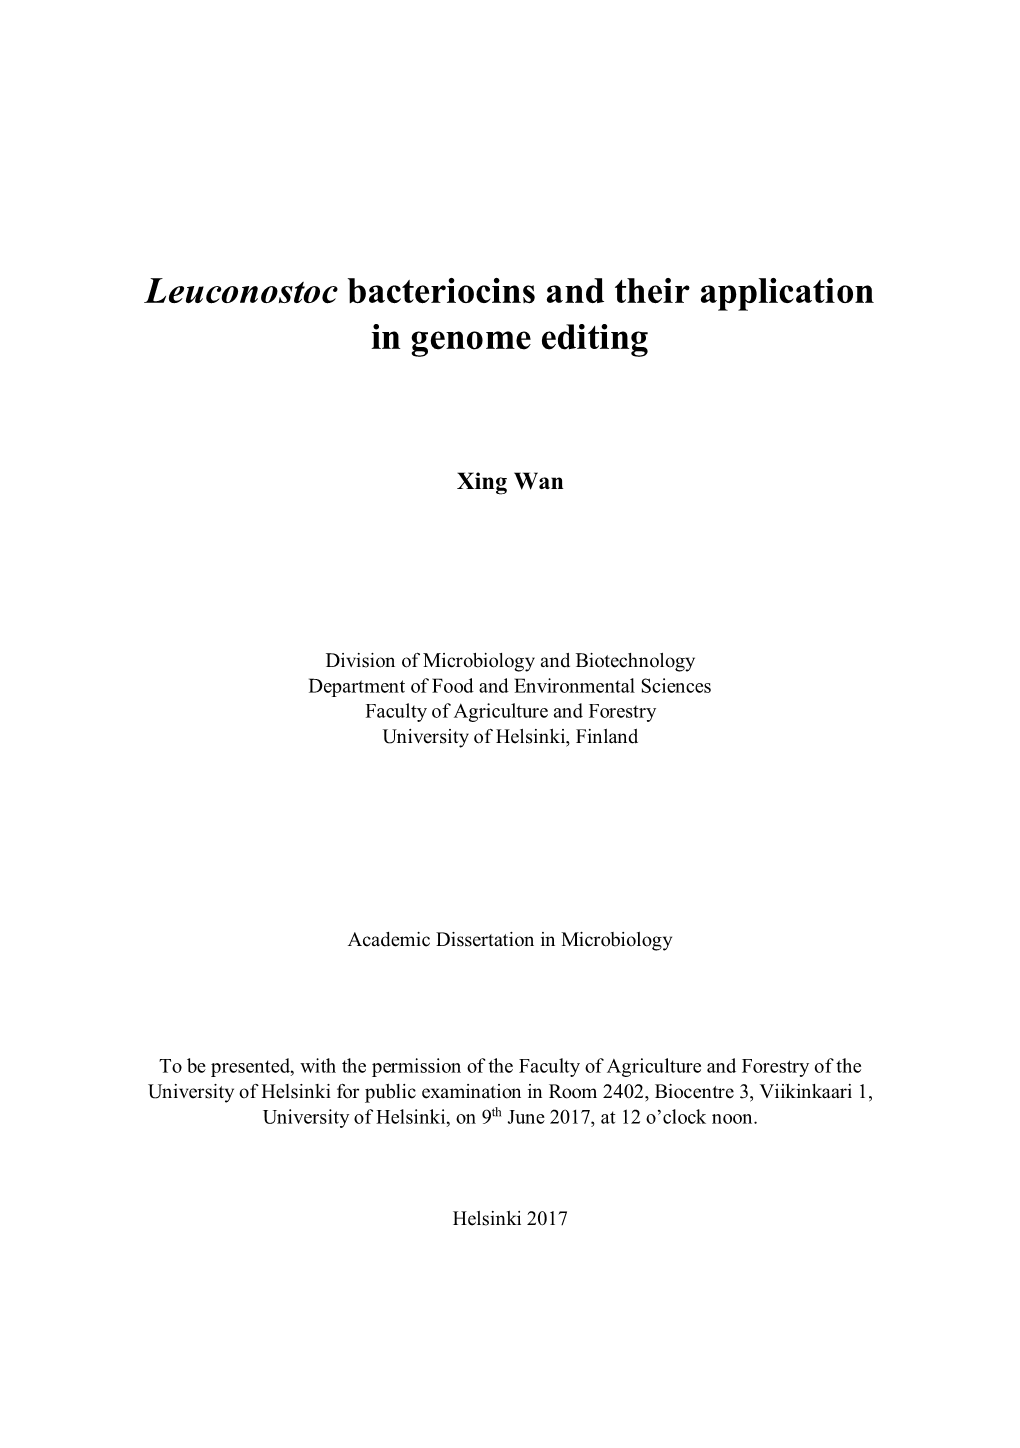 Leuconostoc Bacteriocins and Their Application in Genome Editing